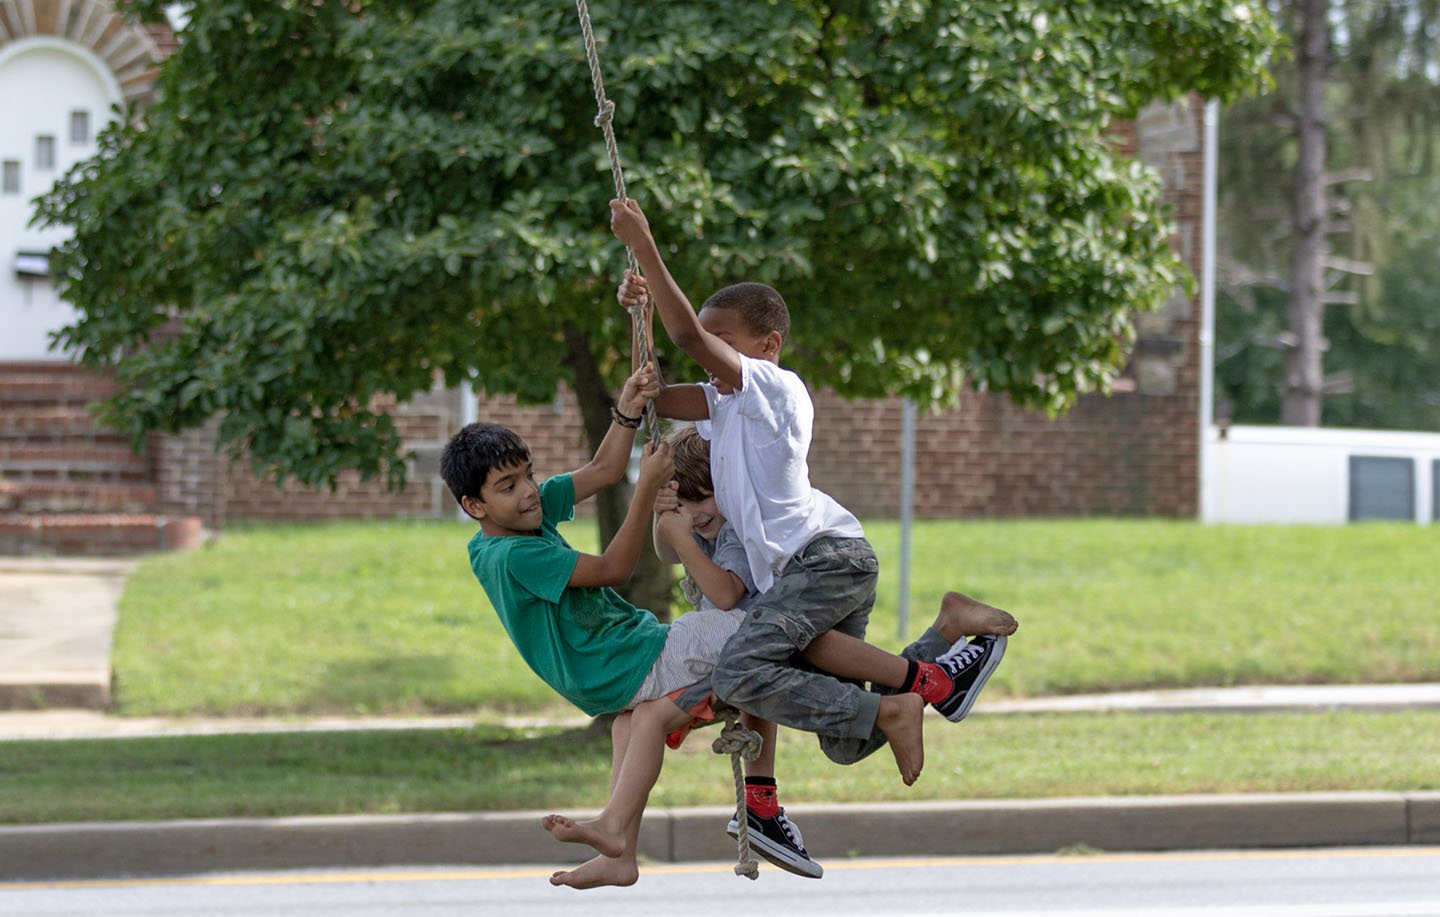 Three students riding a tree swing at the same time